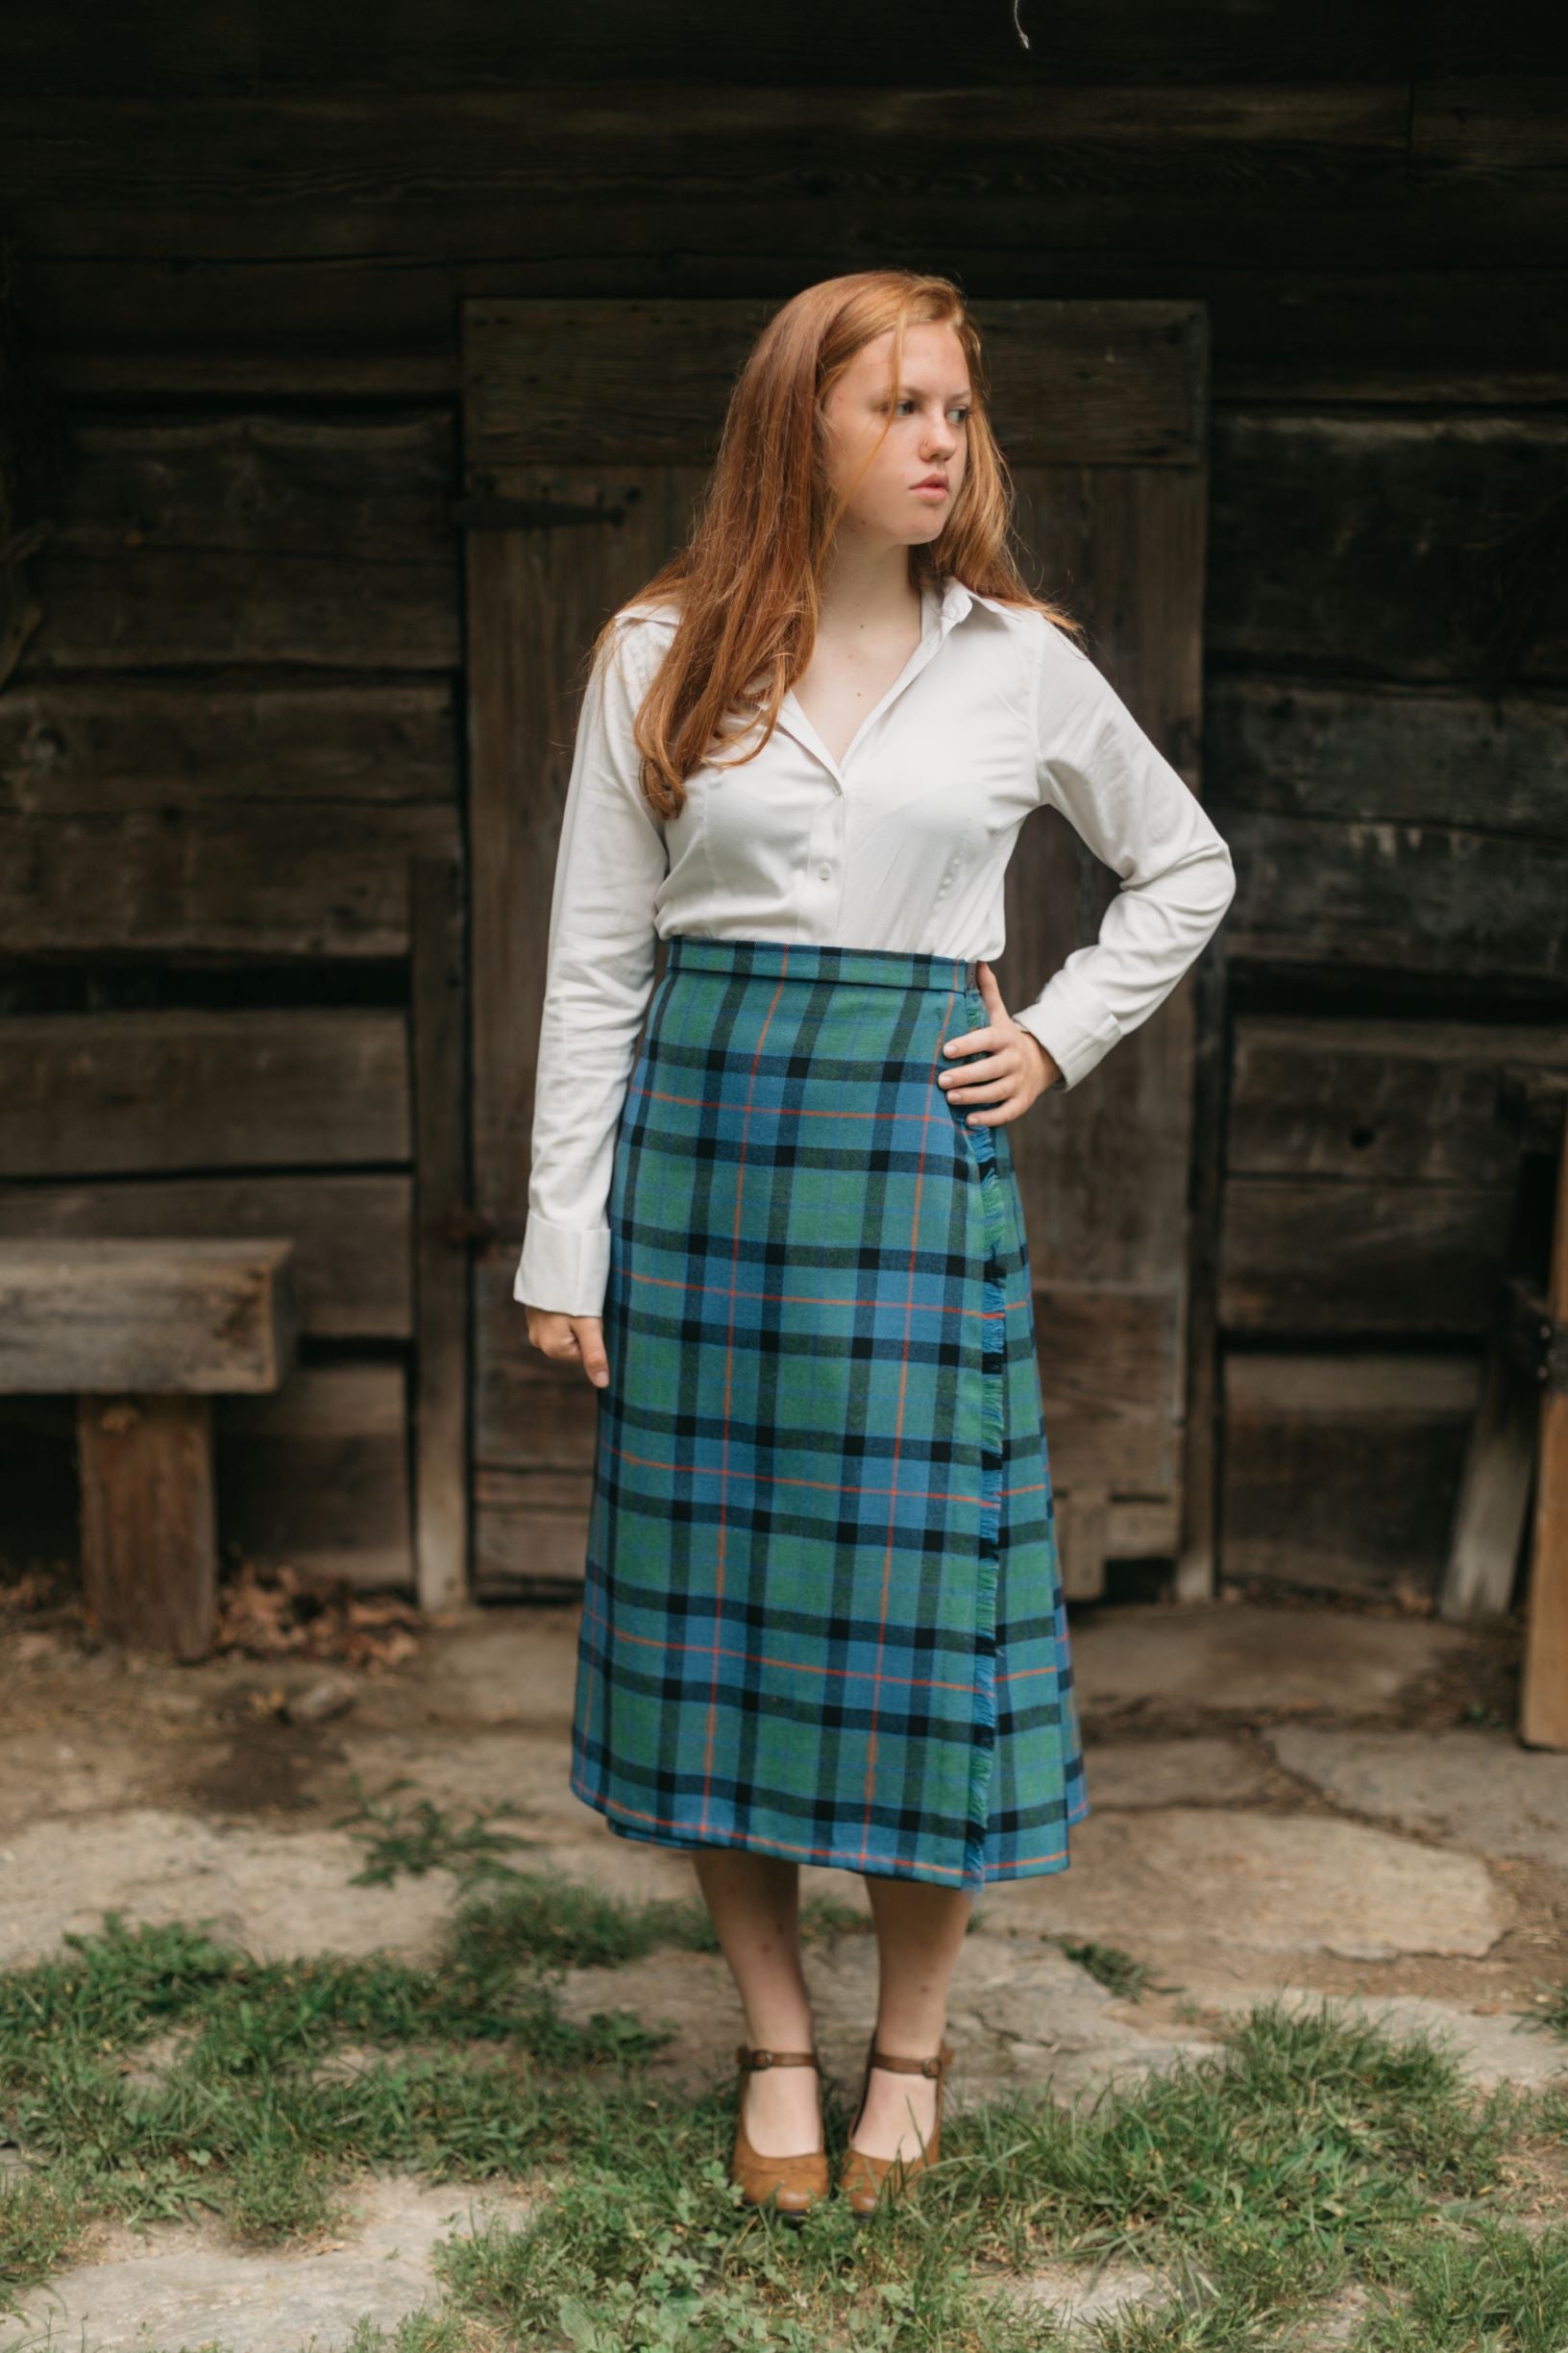 Photo of a young woman standing outdoors wearing the kilt skirt.